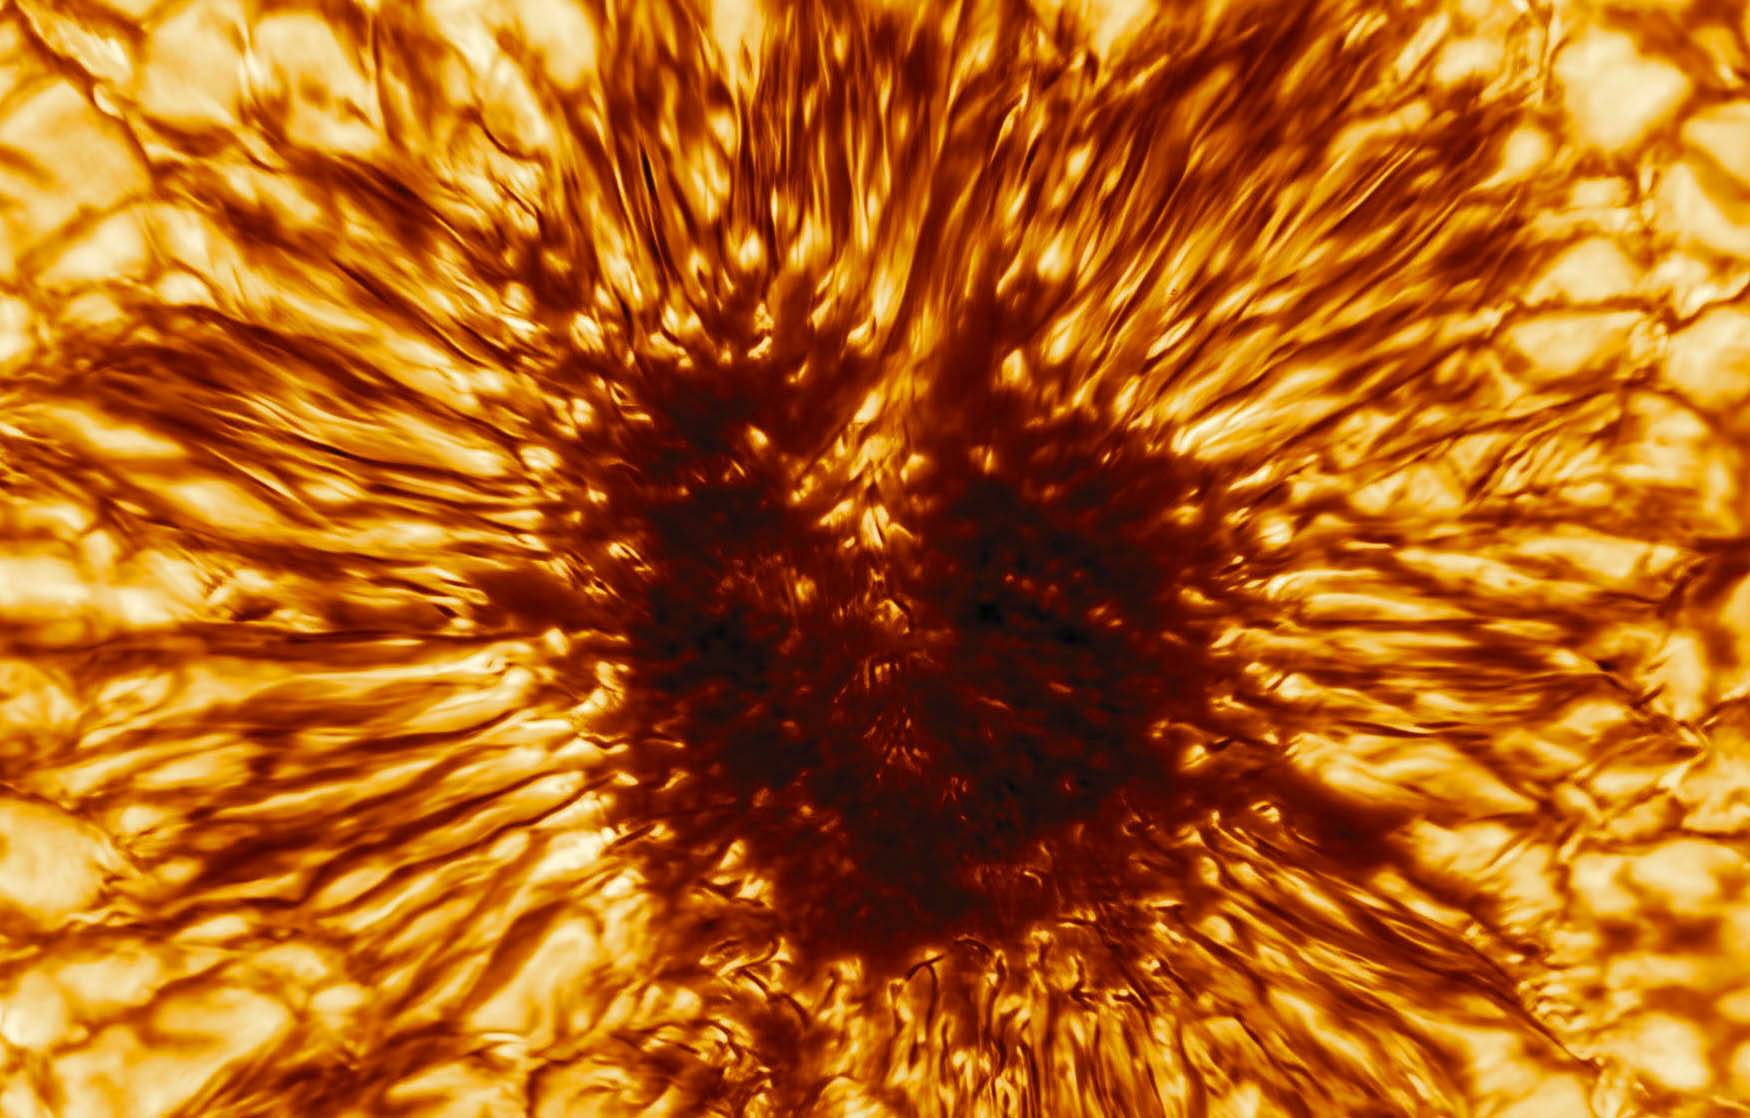 This would possibly possibly occasionally additionally very properly be essentially the most incredible image of the Sun we’ve ever seen